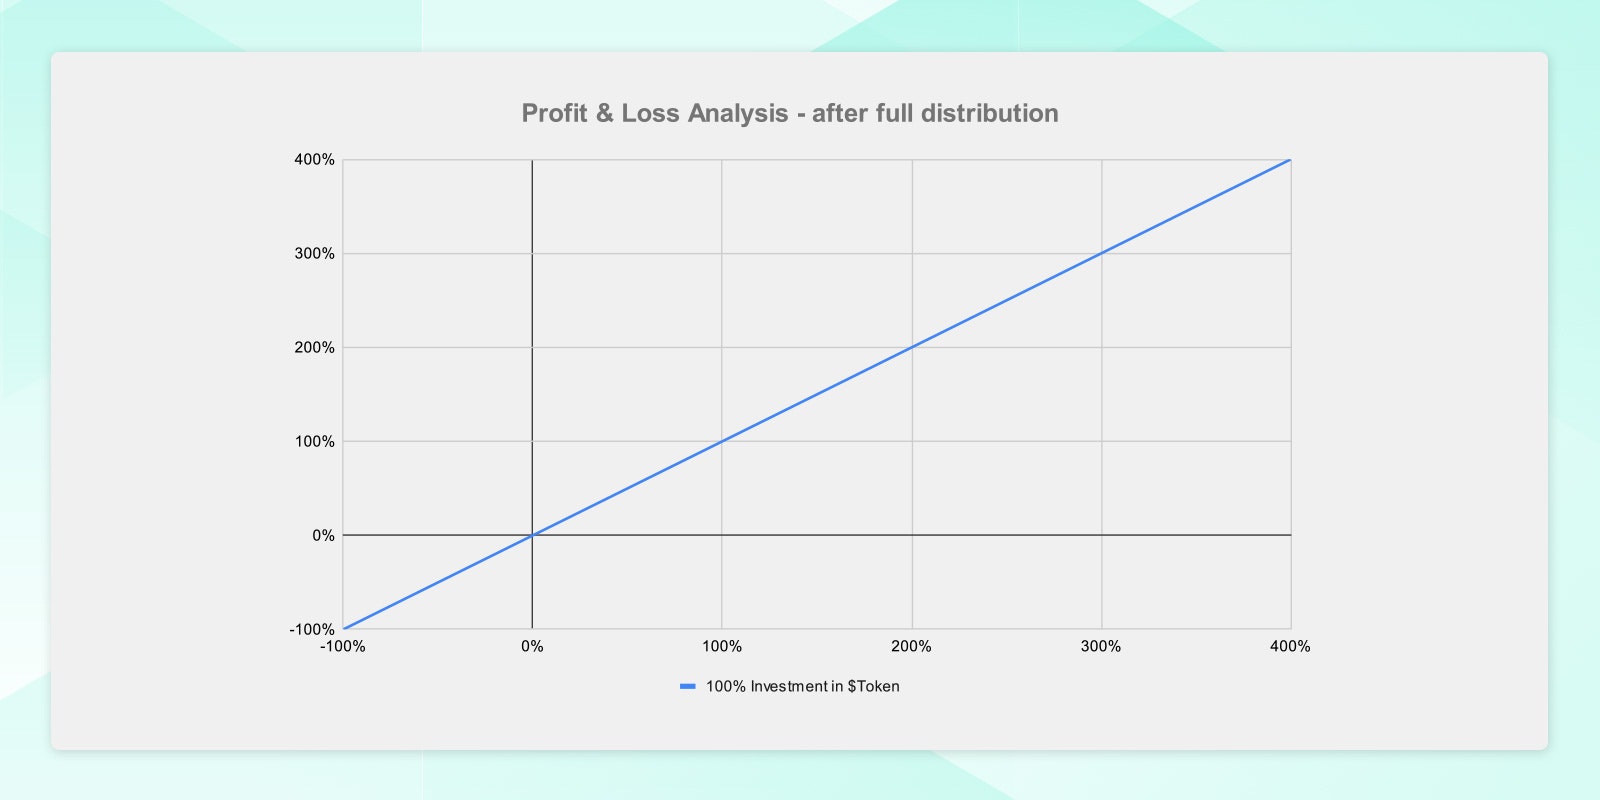 P&L analysis after full distribution